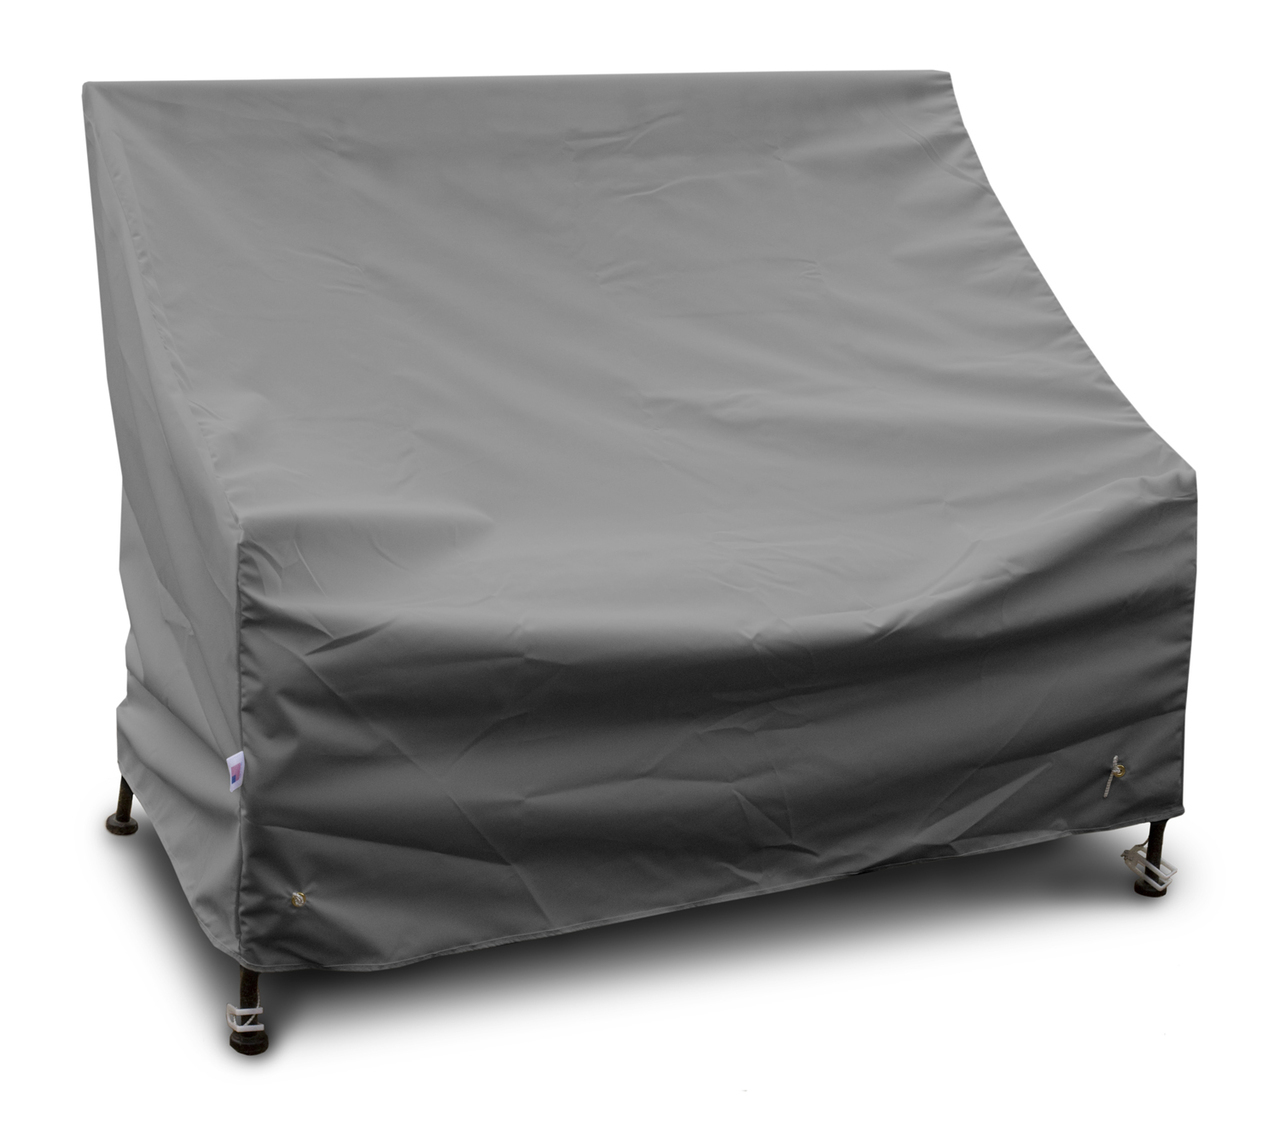 Bench and Glider Cover - 78W x 38D x 30H in.